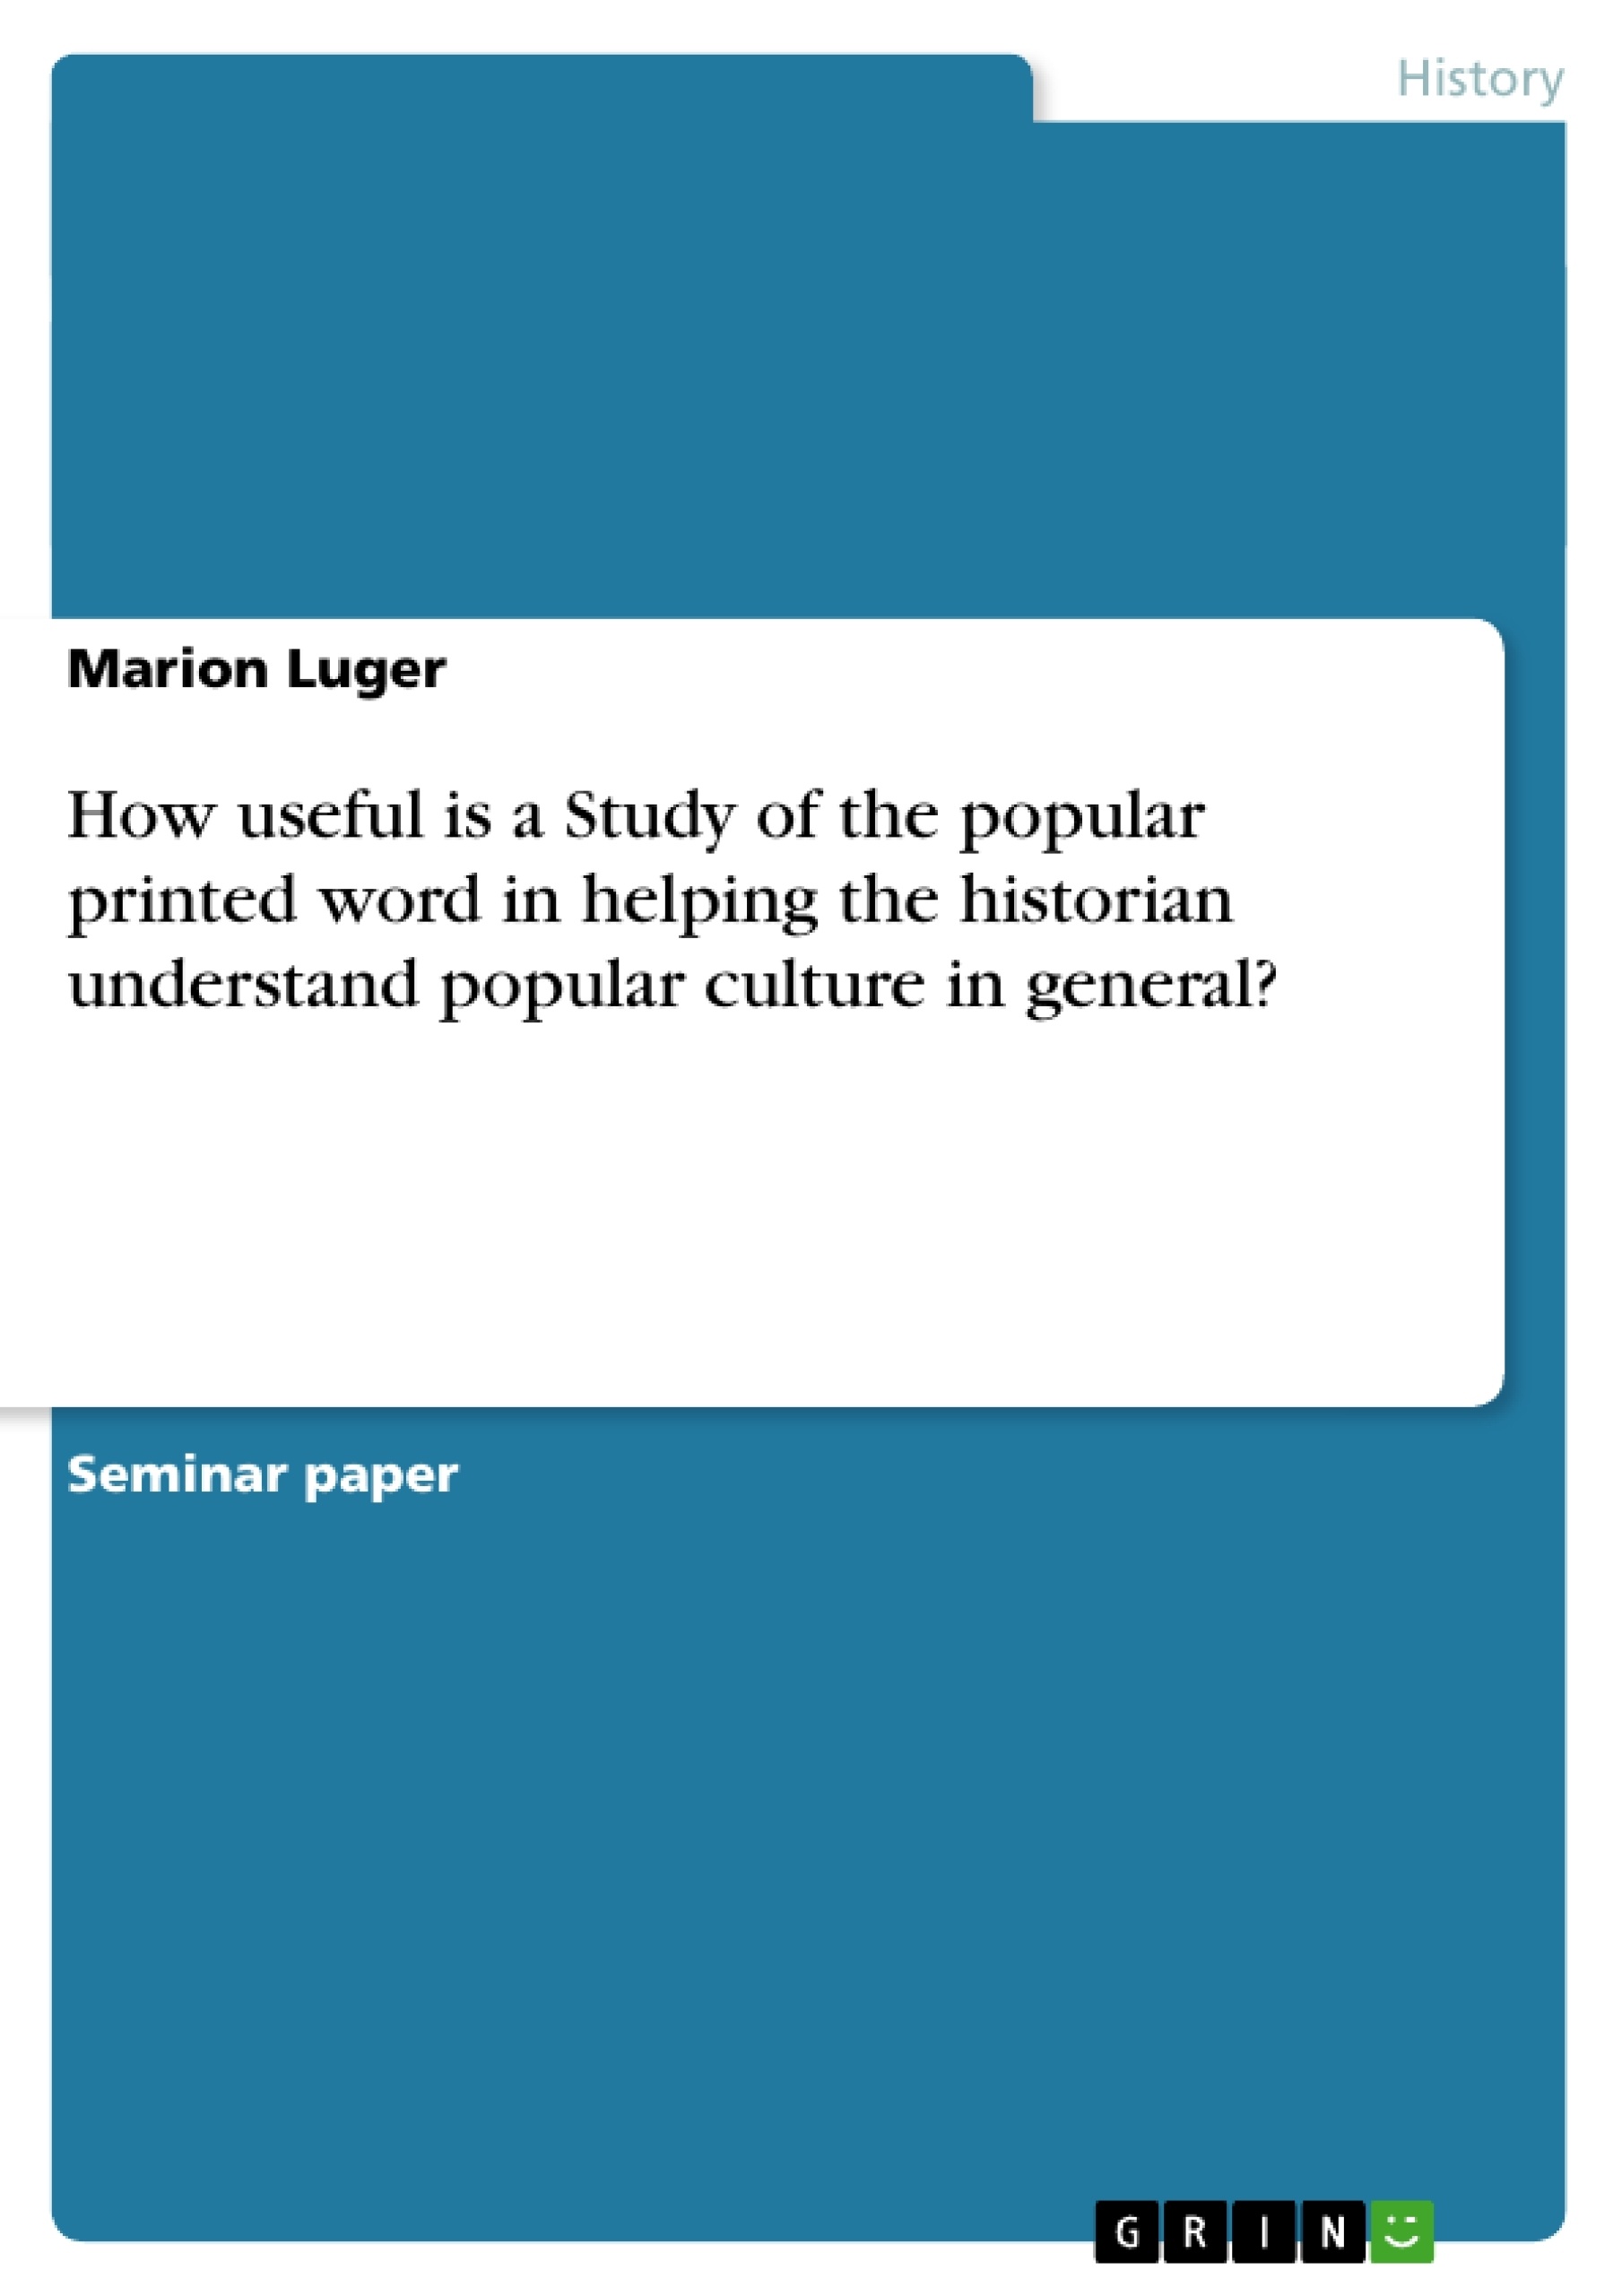 Título: How useful is a Study of the popular printed word in helping the historian understand popular culture in general? 